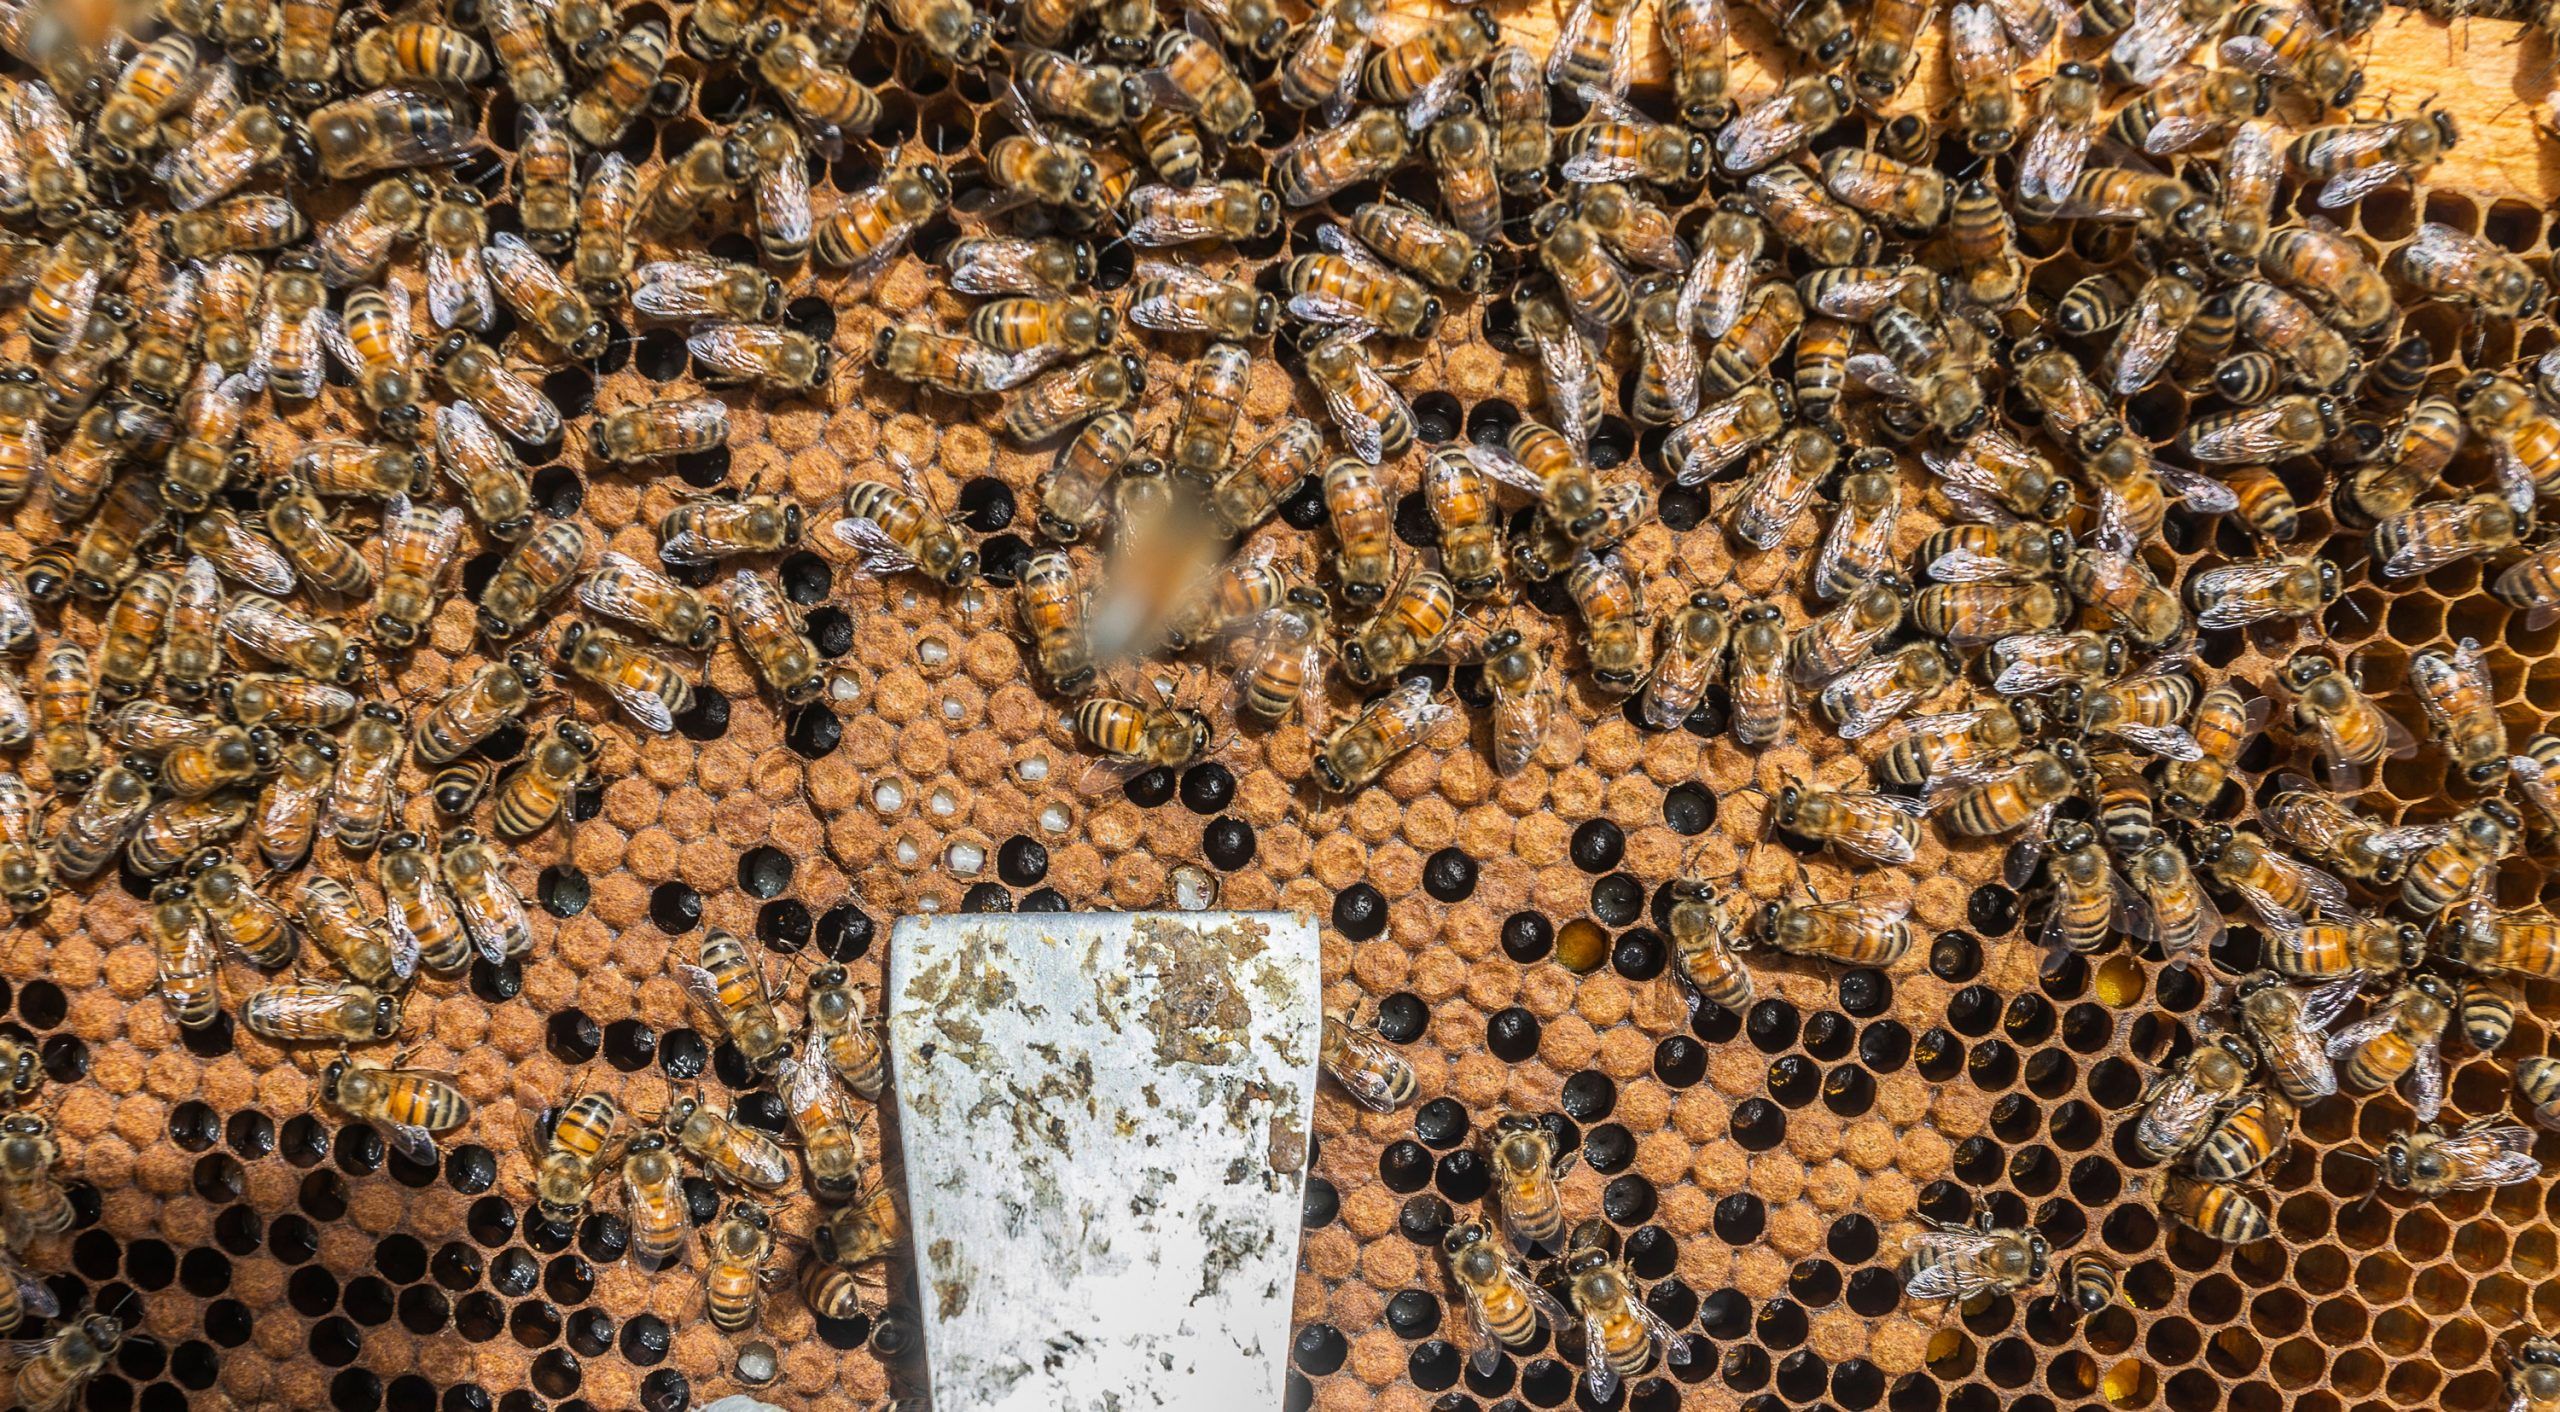 Bees clustered together on honeycomb. 